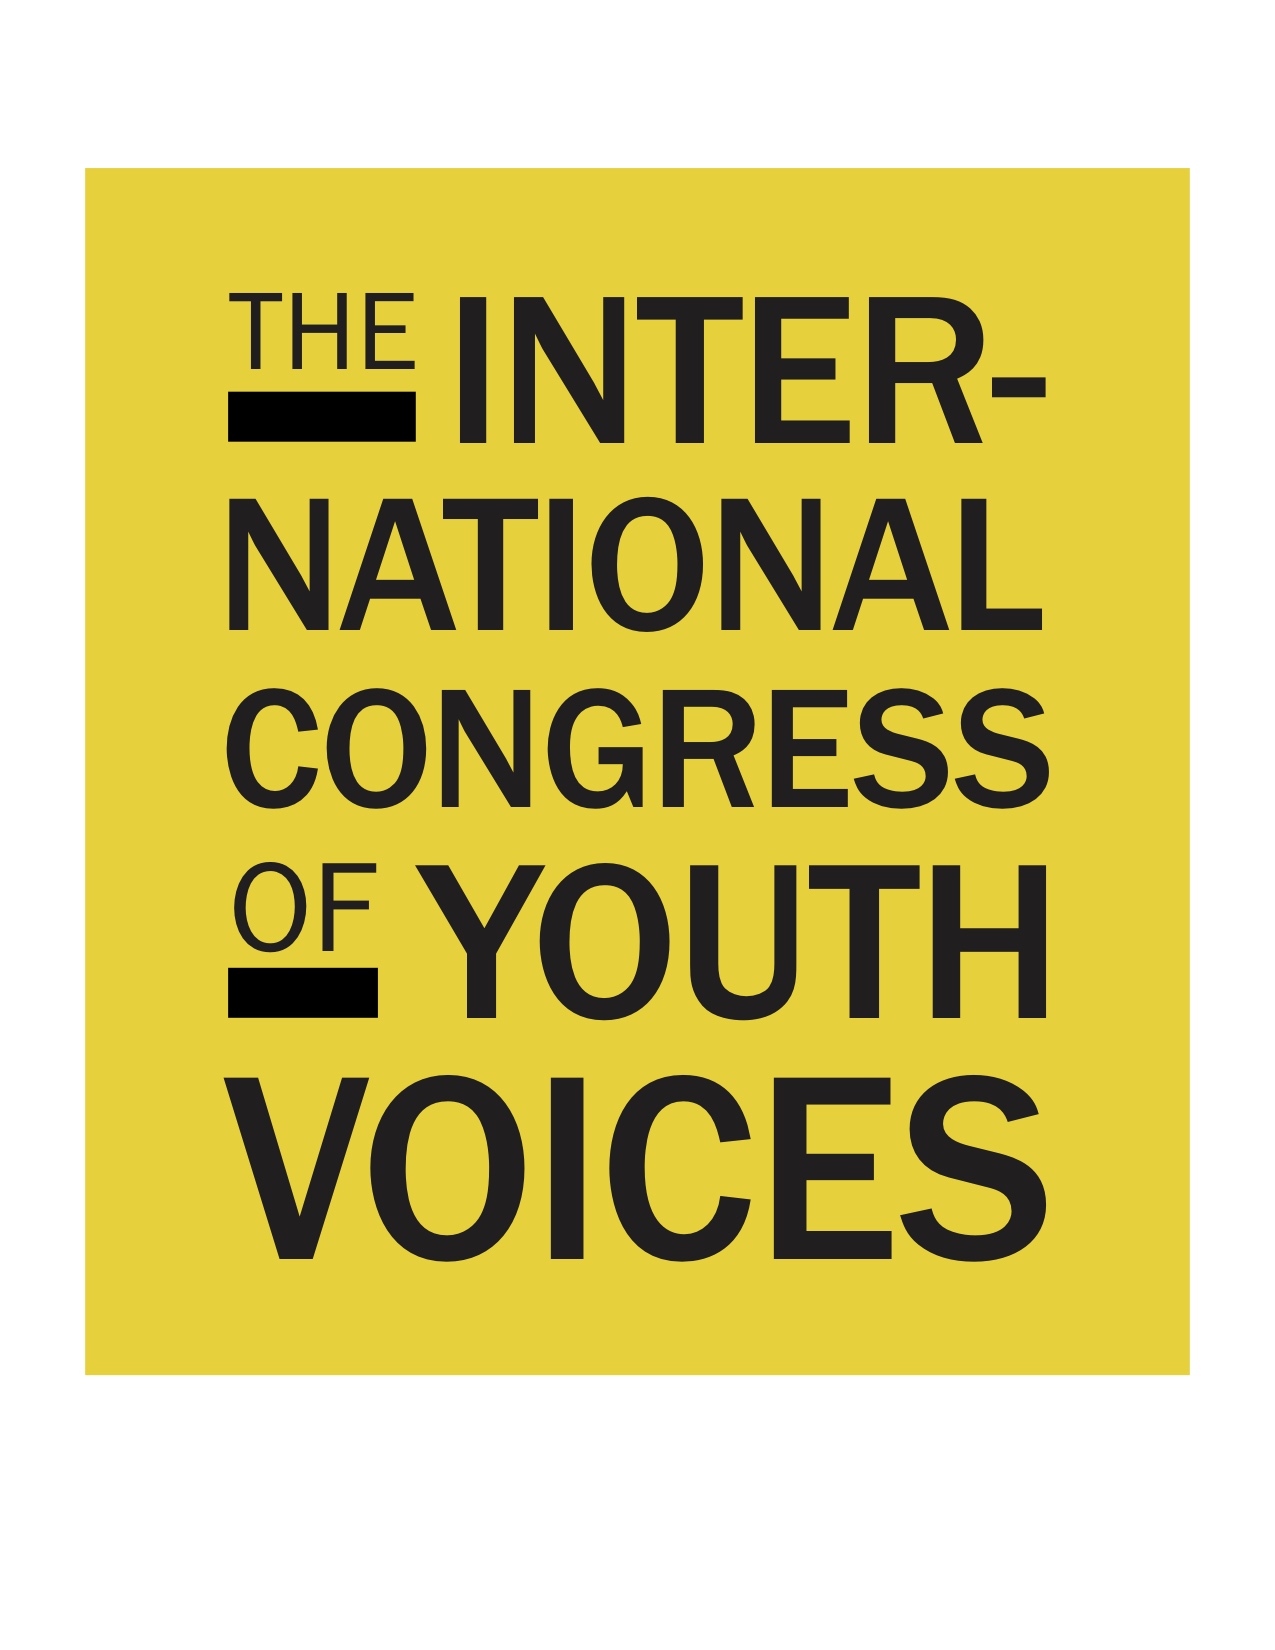 International Congress of Youth Voices